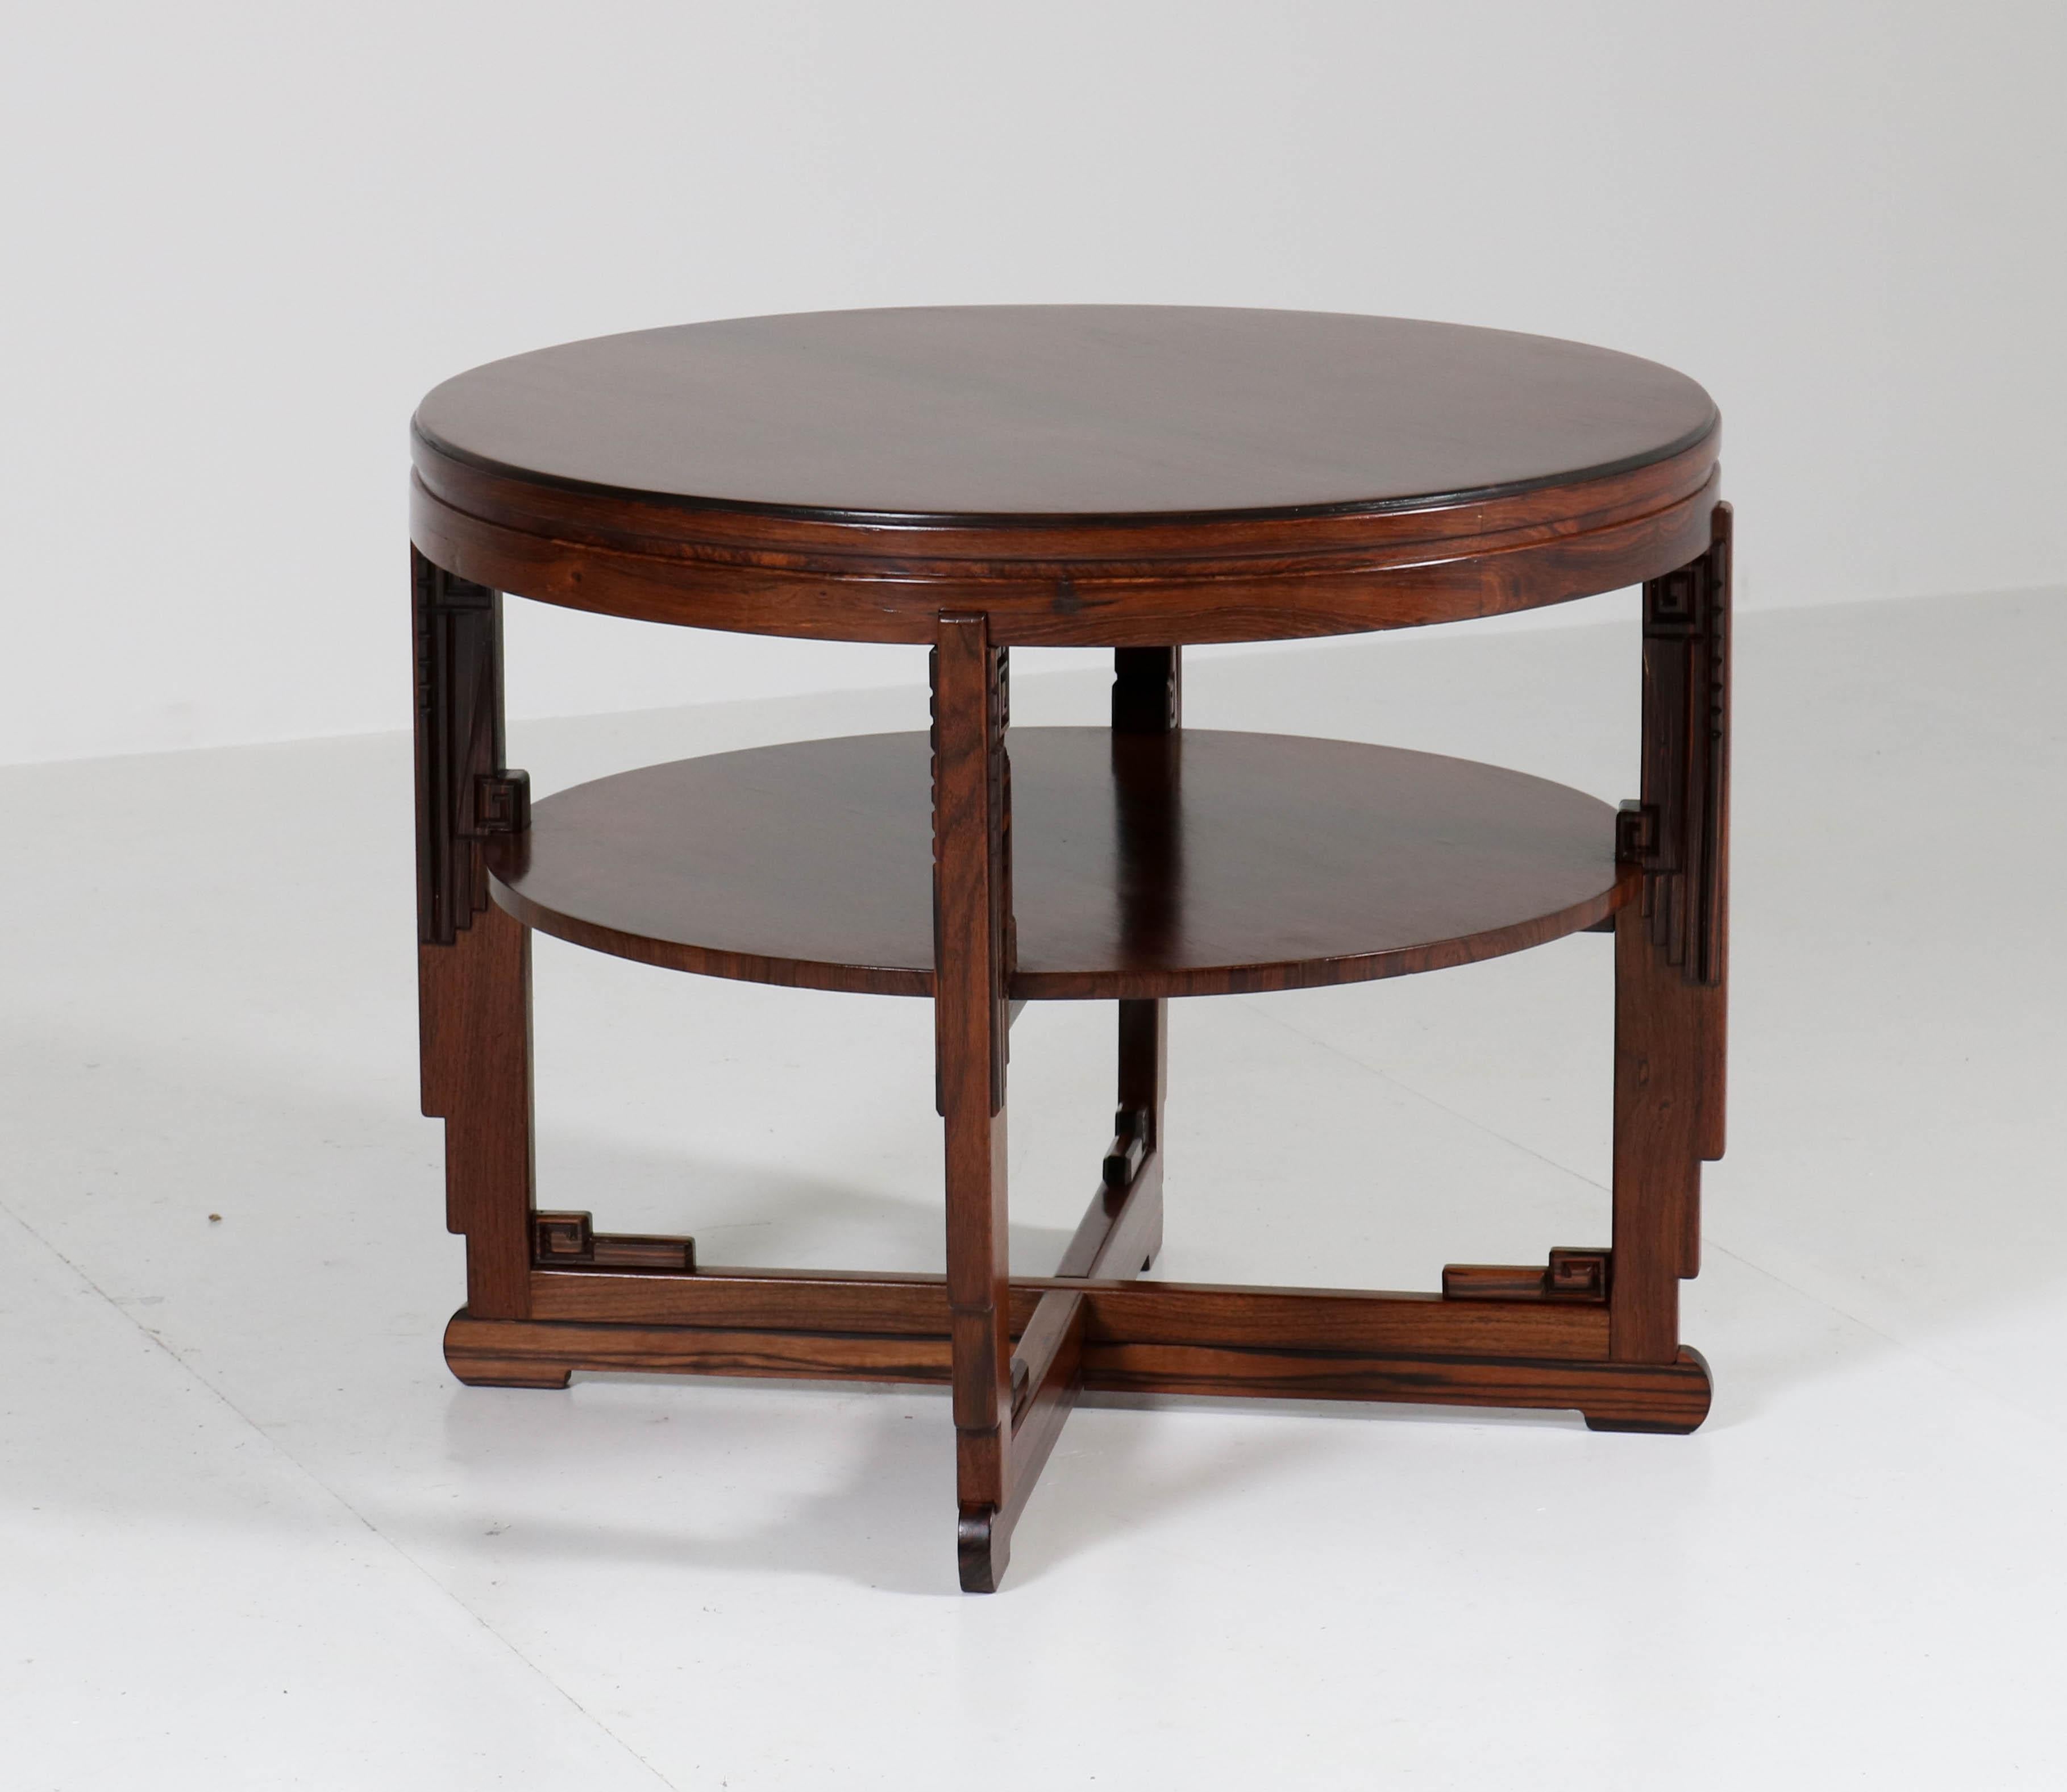 Macassar Rosewood Art Deco Amsterdam School Coffee Table by Max Coini Amsterdam, 1920s